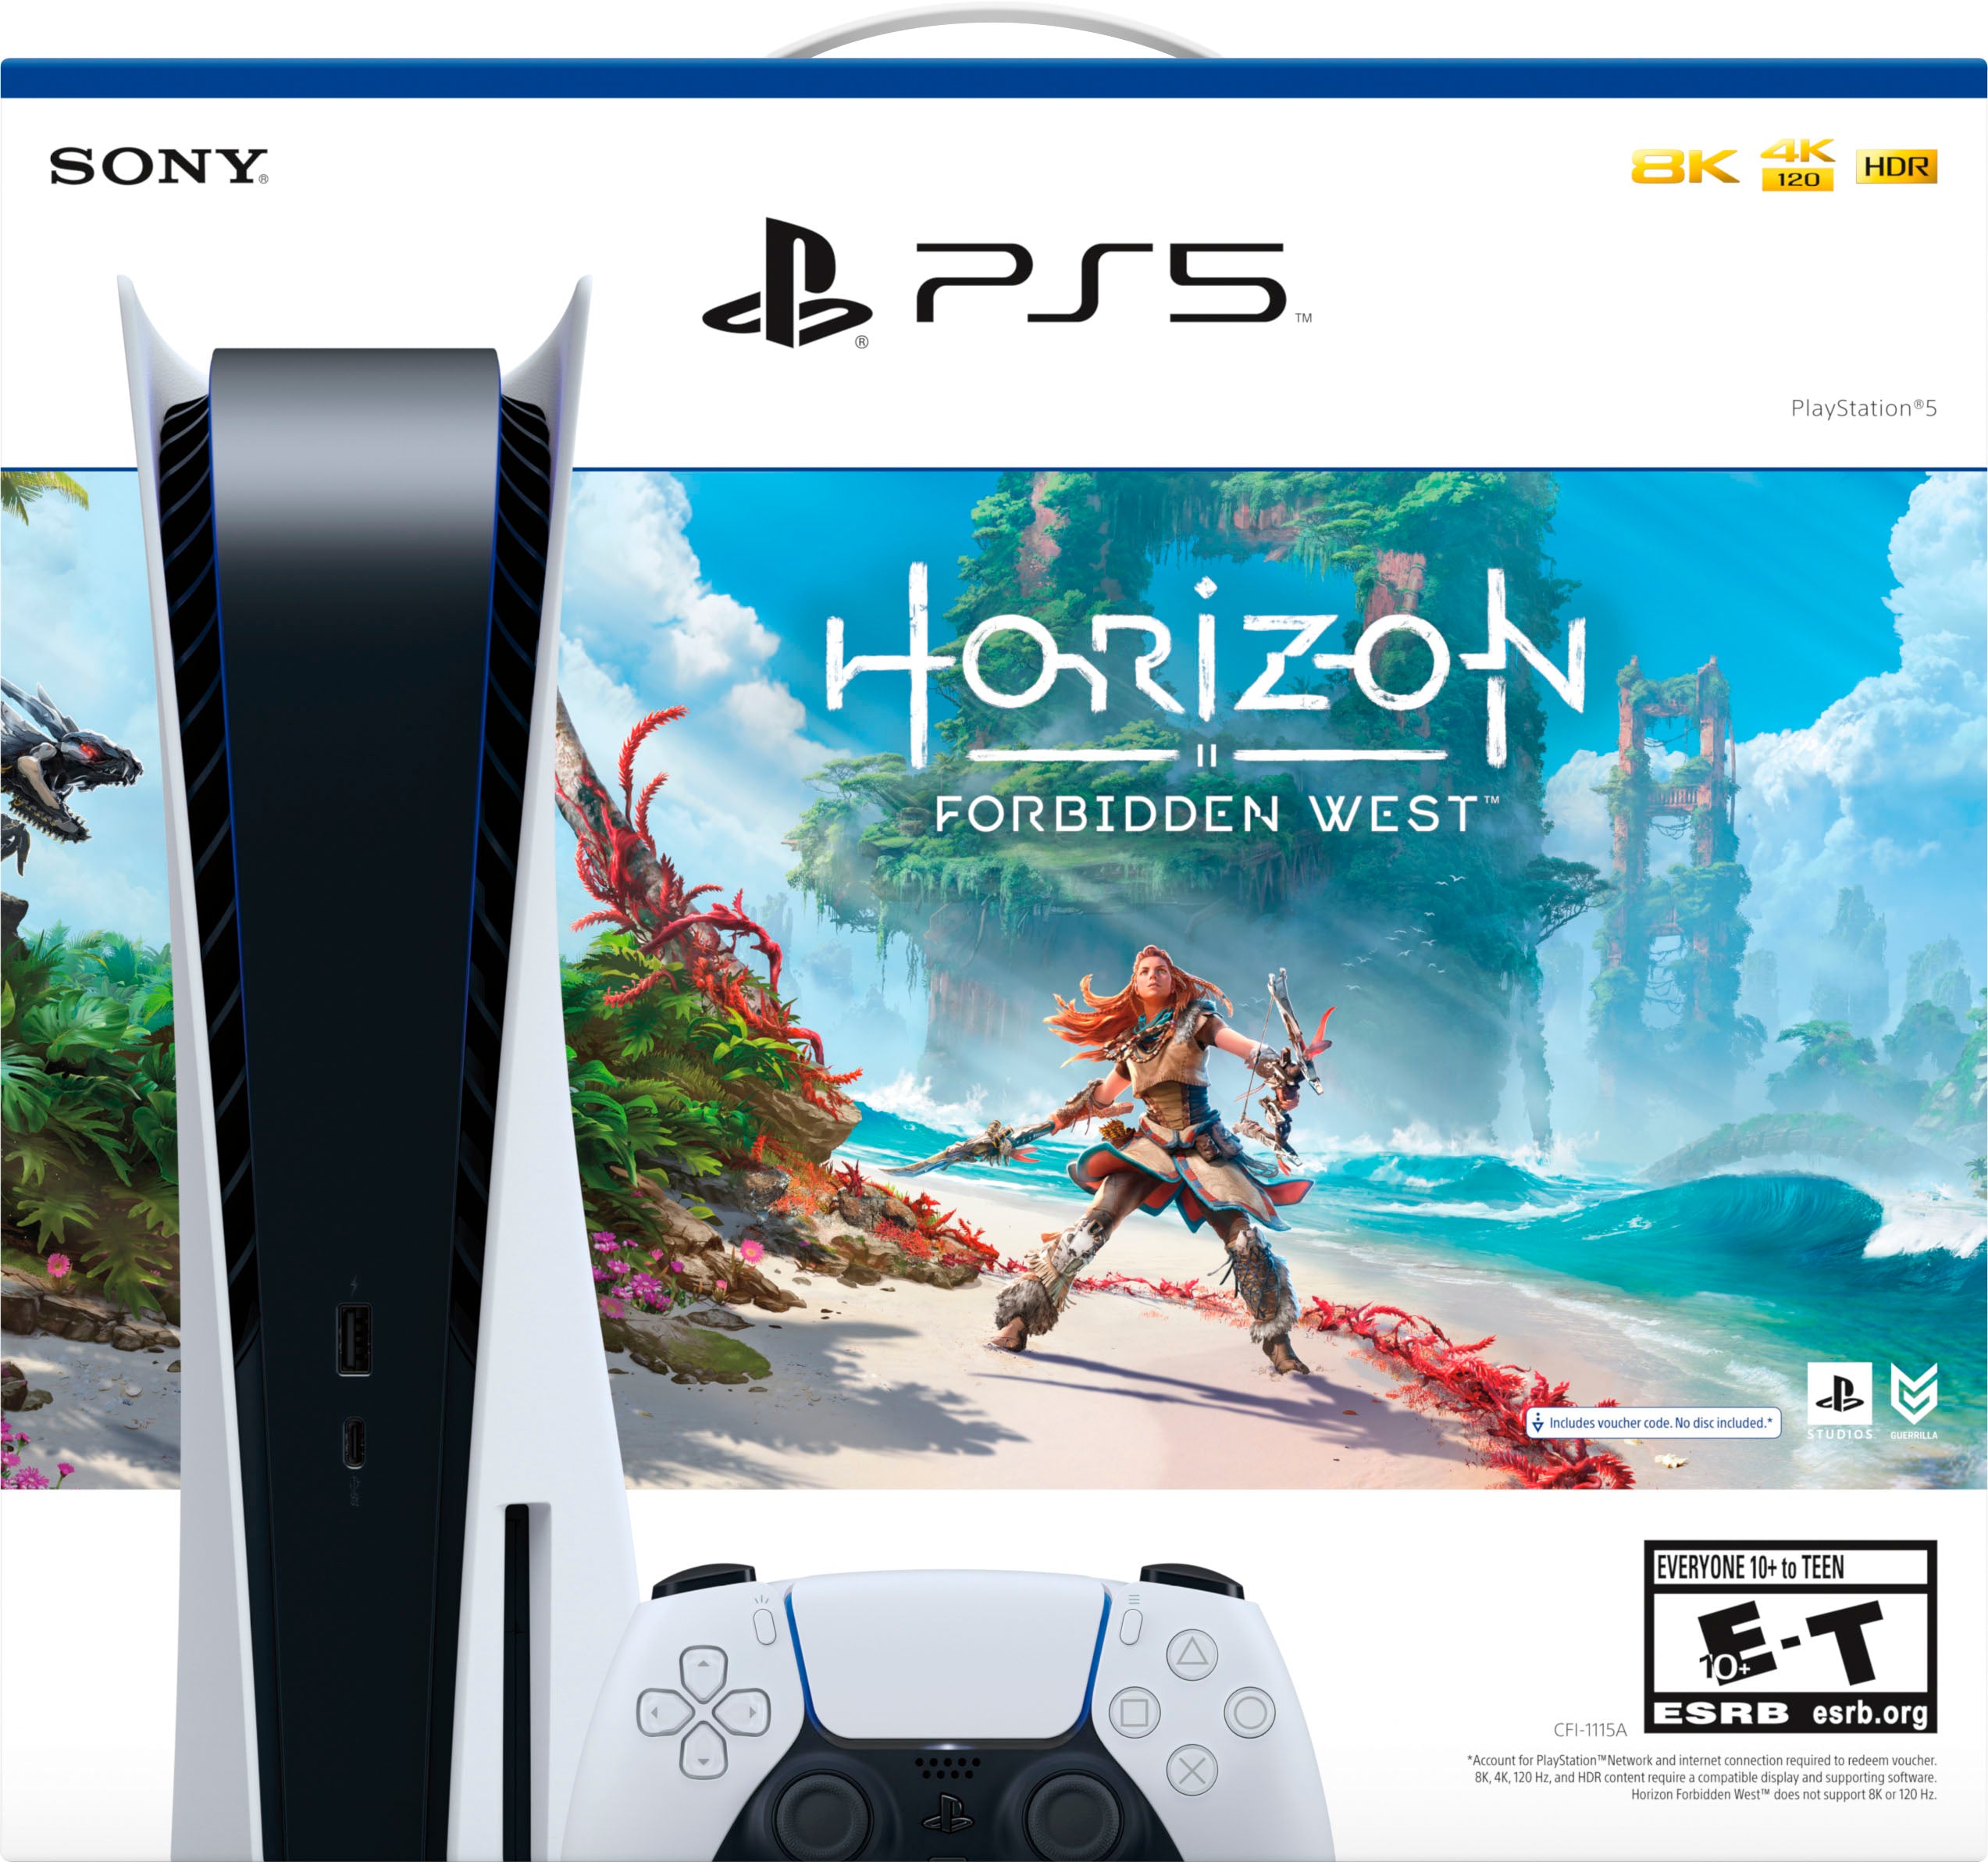 Playstation 5 Horizon Forbidden West Bundle with Ratchet & Clank and Mytrix Controller Charger